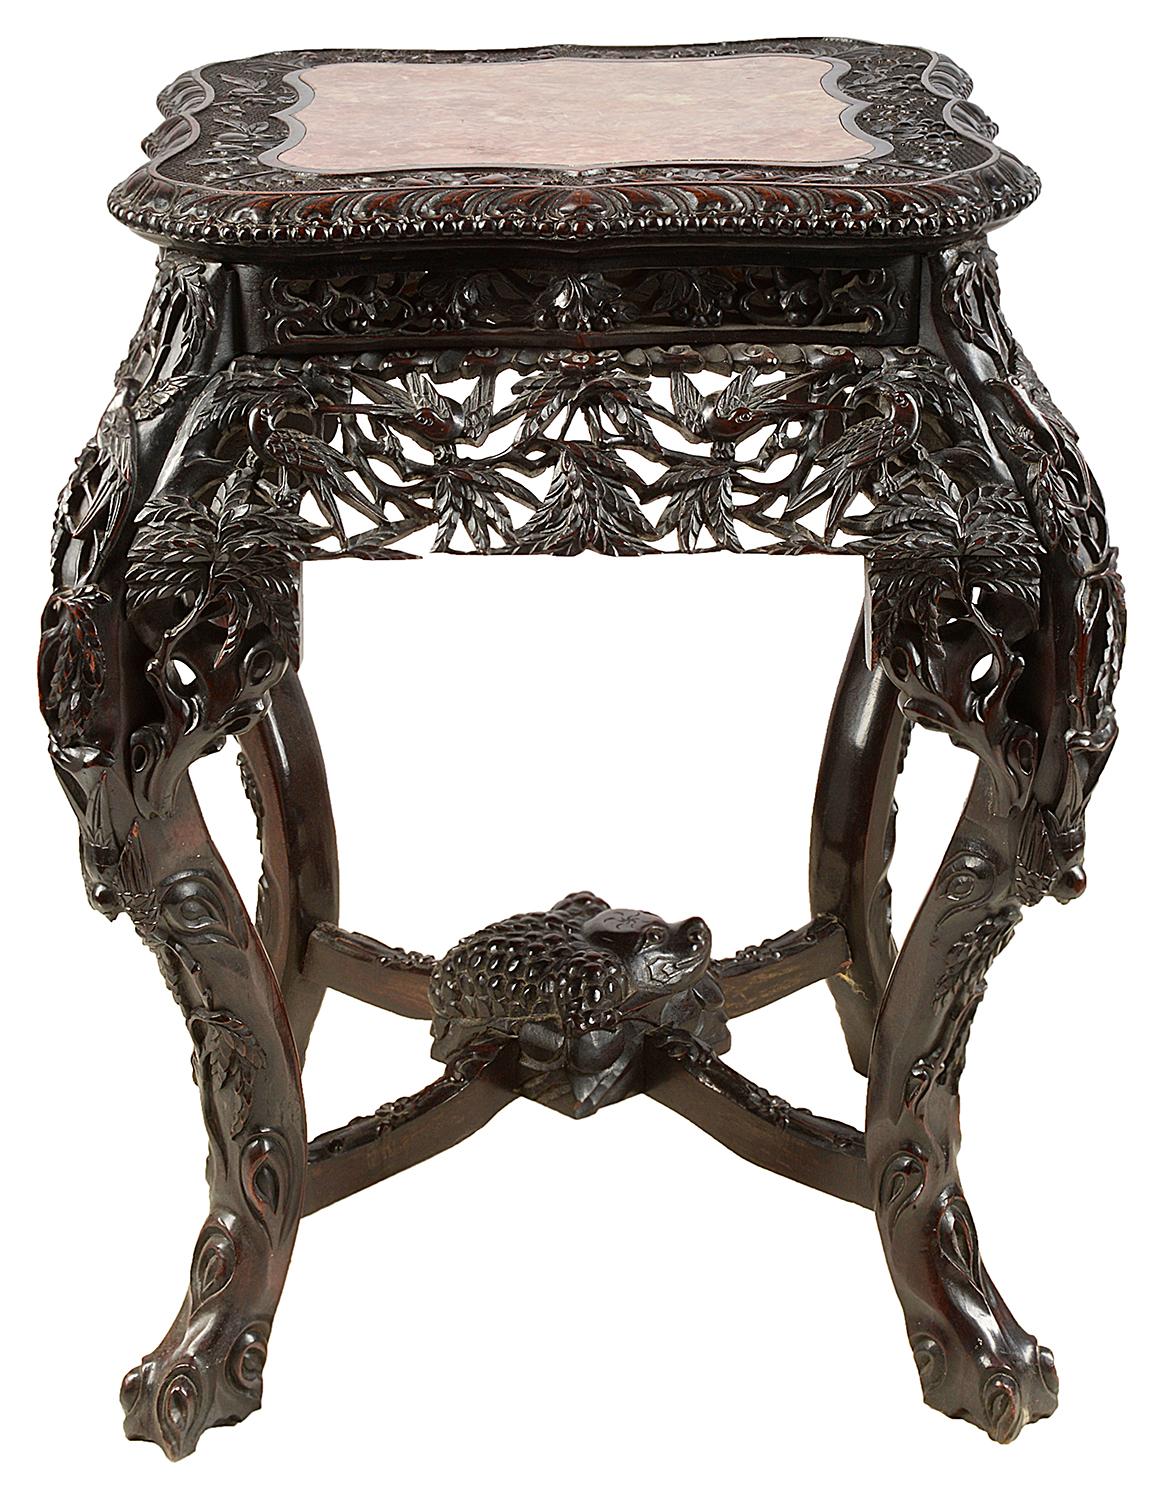 A very good quality 19th century Chinese hardwood stand, having inset rouge marble top, wonderful hand carved palm leaves and exotic bird decoration, raised on tree like cabriole legs, united by an X-stretcher with a carved mythical creature to the